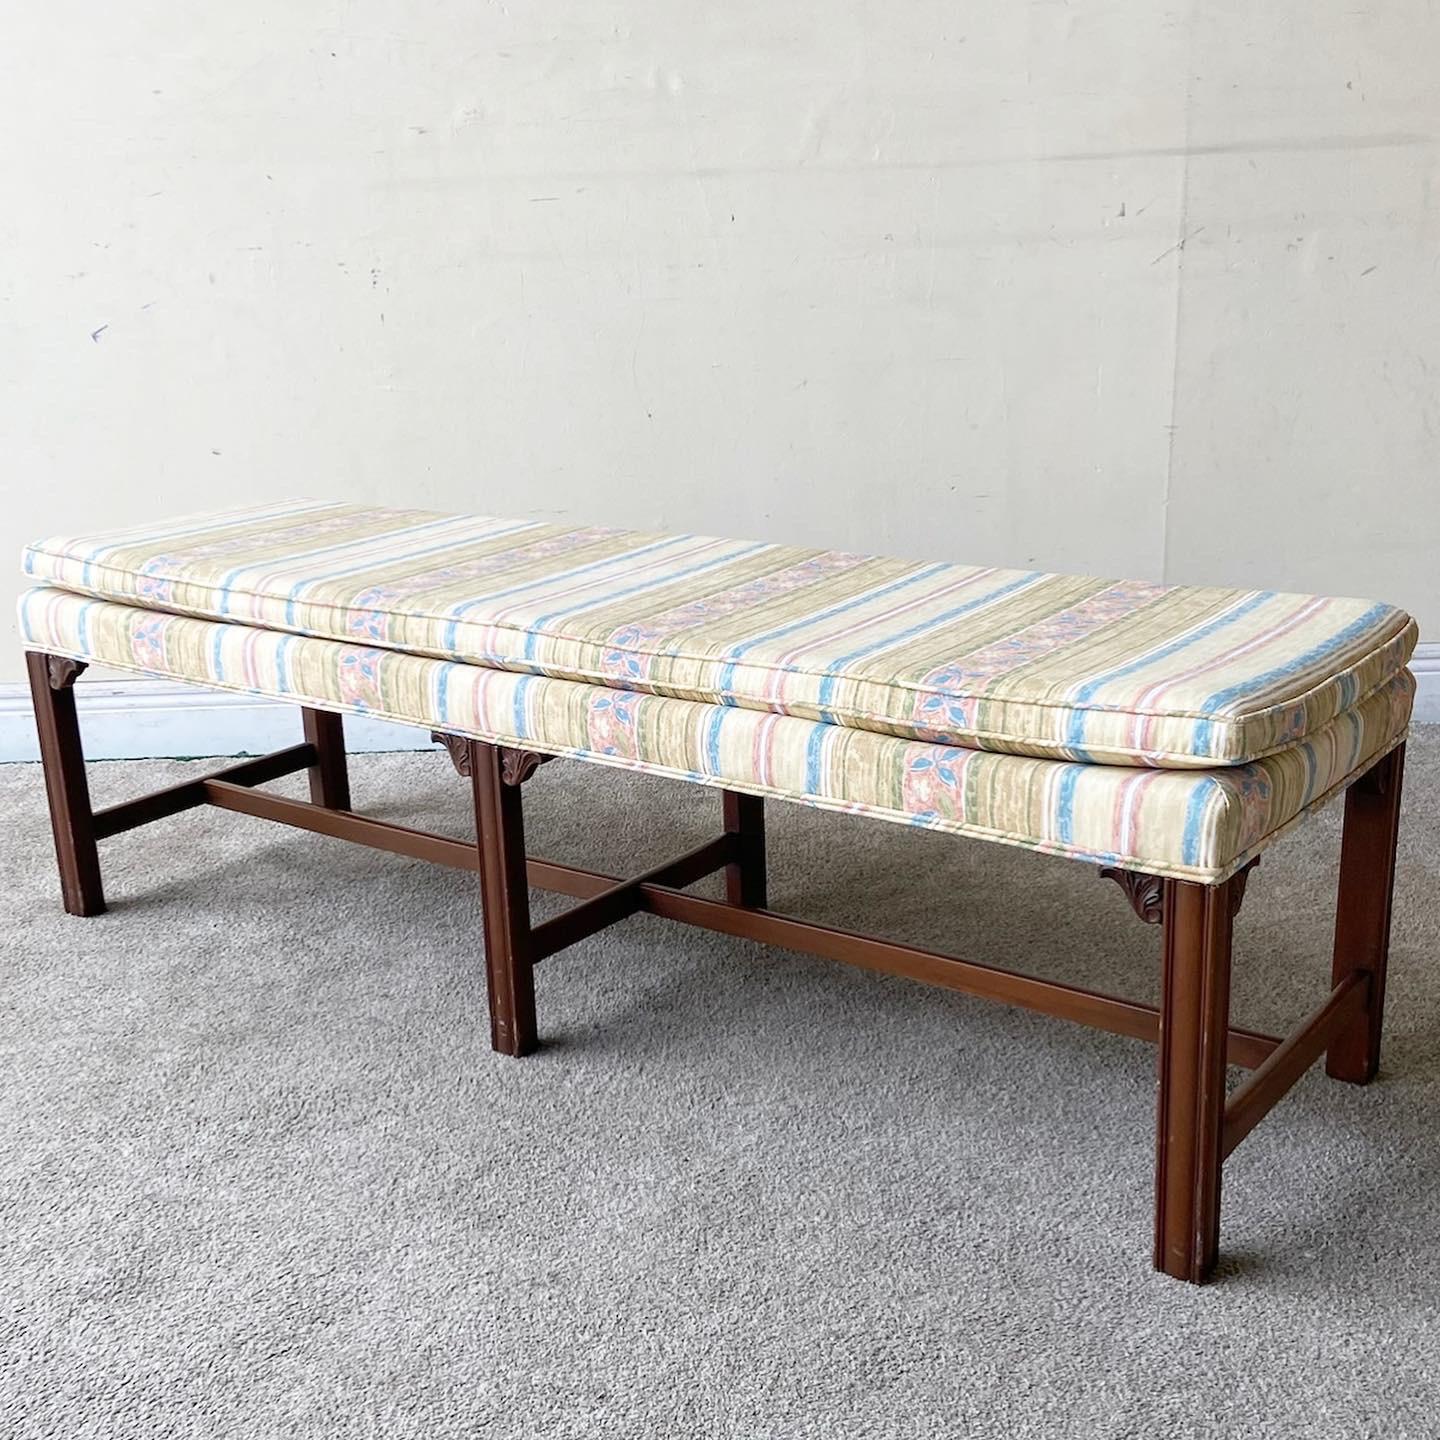 Exceptional mid century wooden bench. Possibly by Henredon. It was acquired with a matching piece by Henredon. Features a floral fabric.